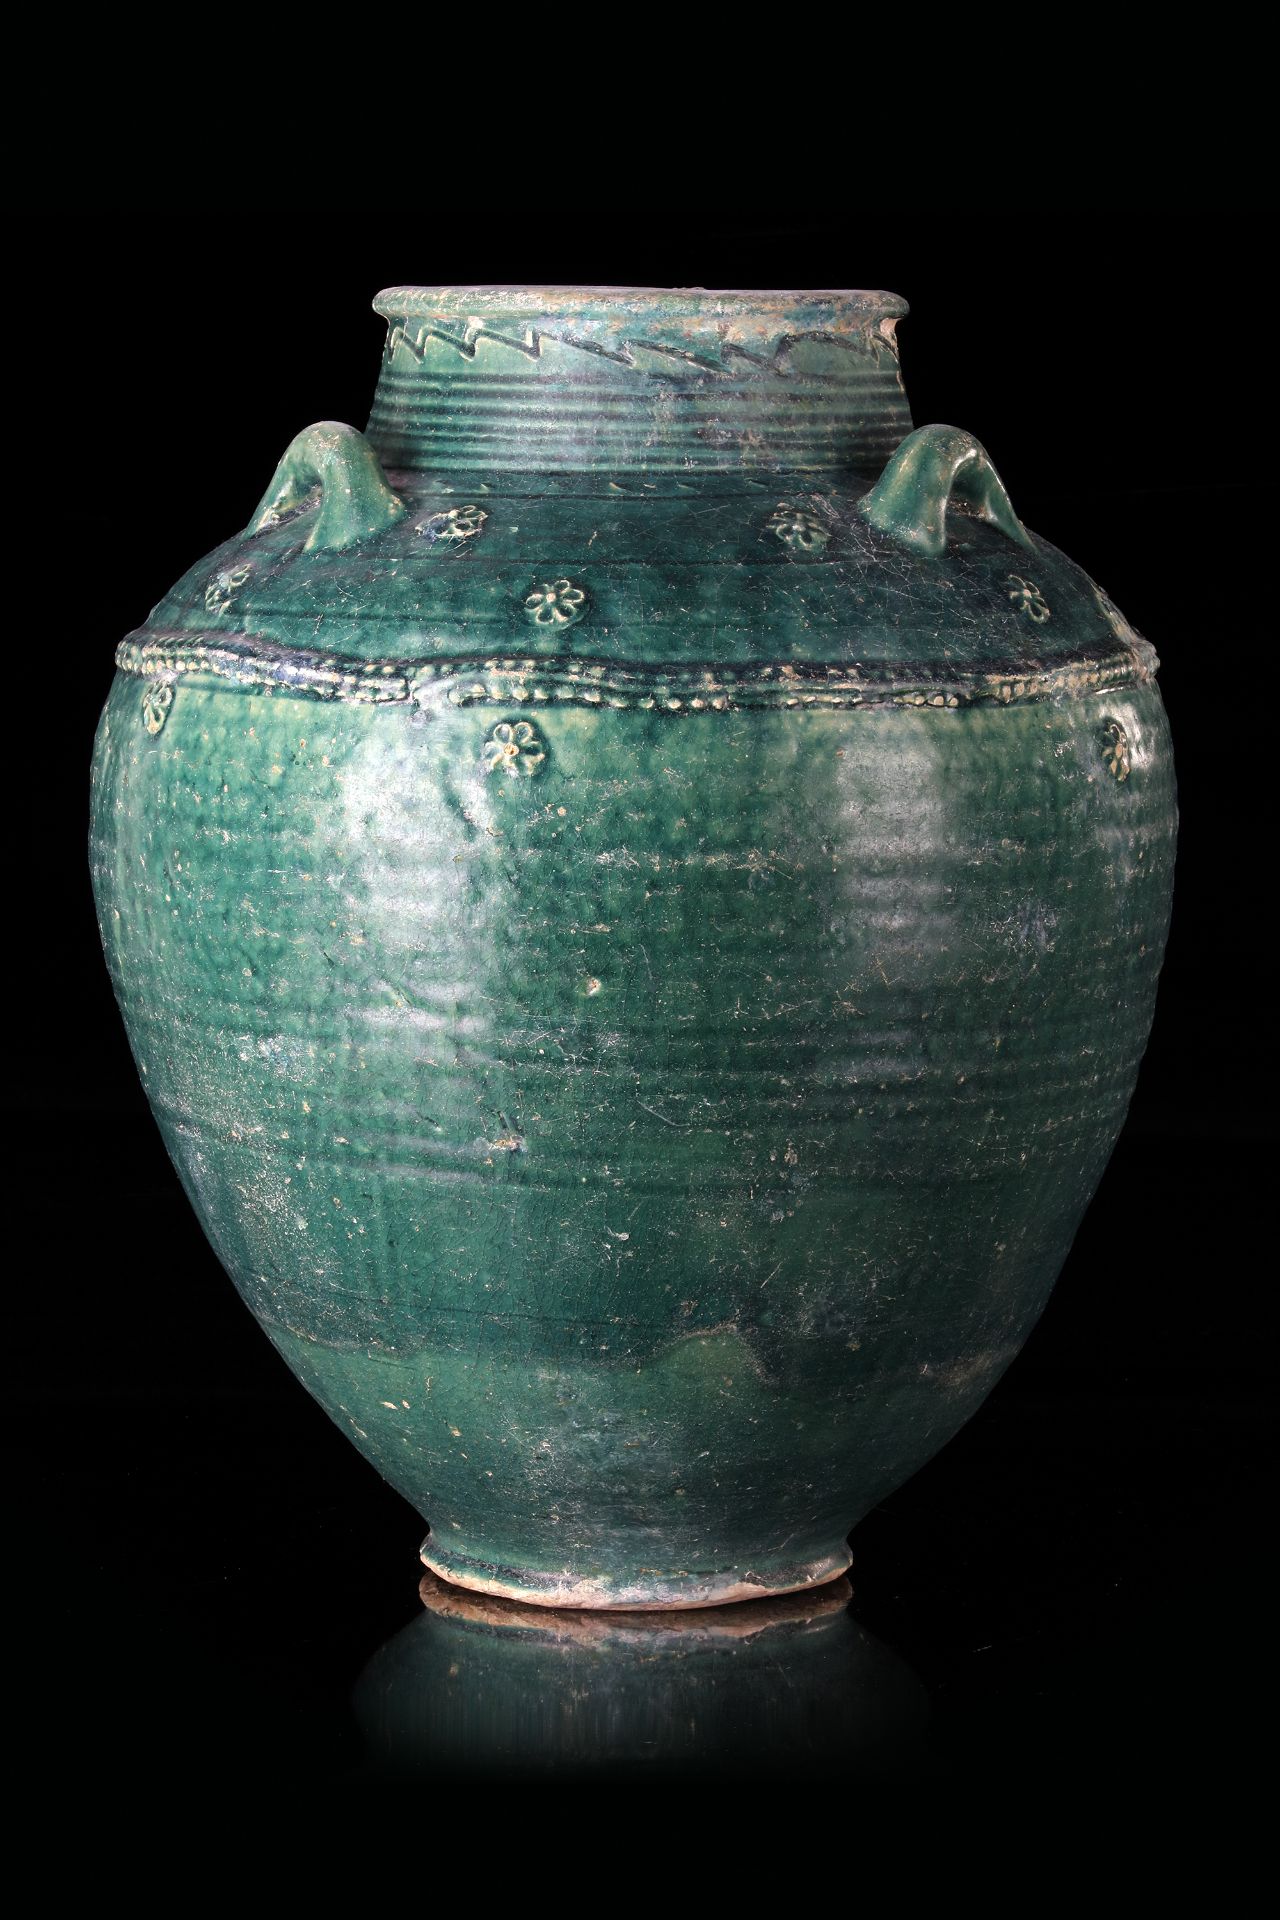 A LARGE POST SASSANIAN TURQUOISE GLAZED POTTERY STORAGE JAR, PERSIA, 6TH-8TH CENTURY